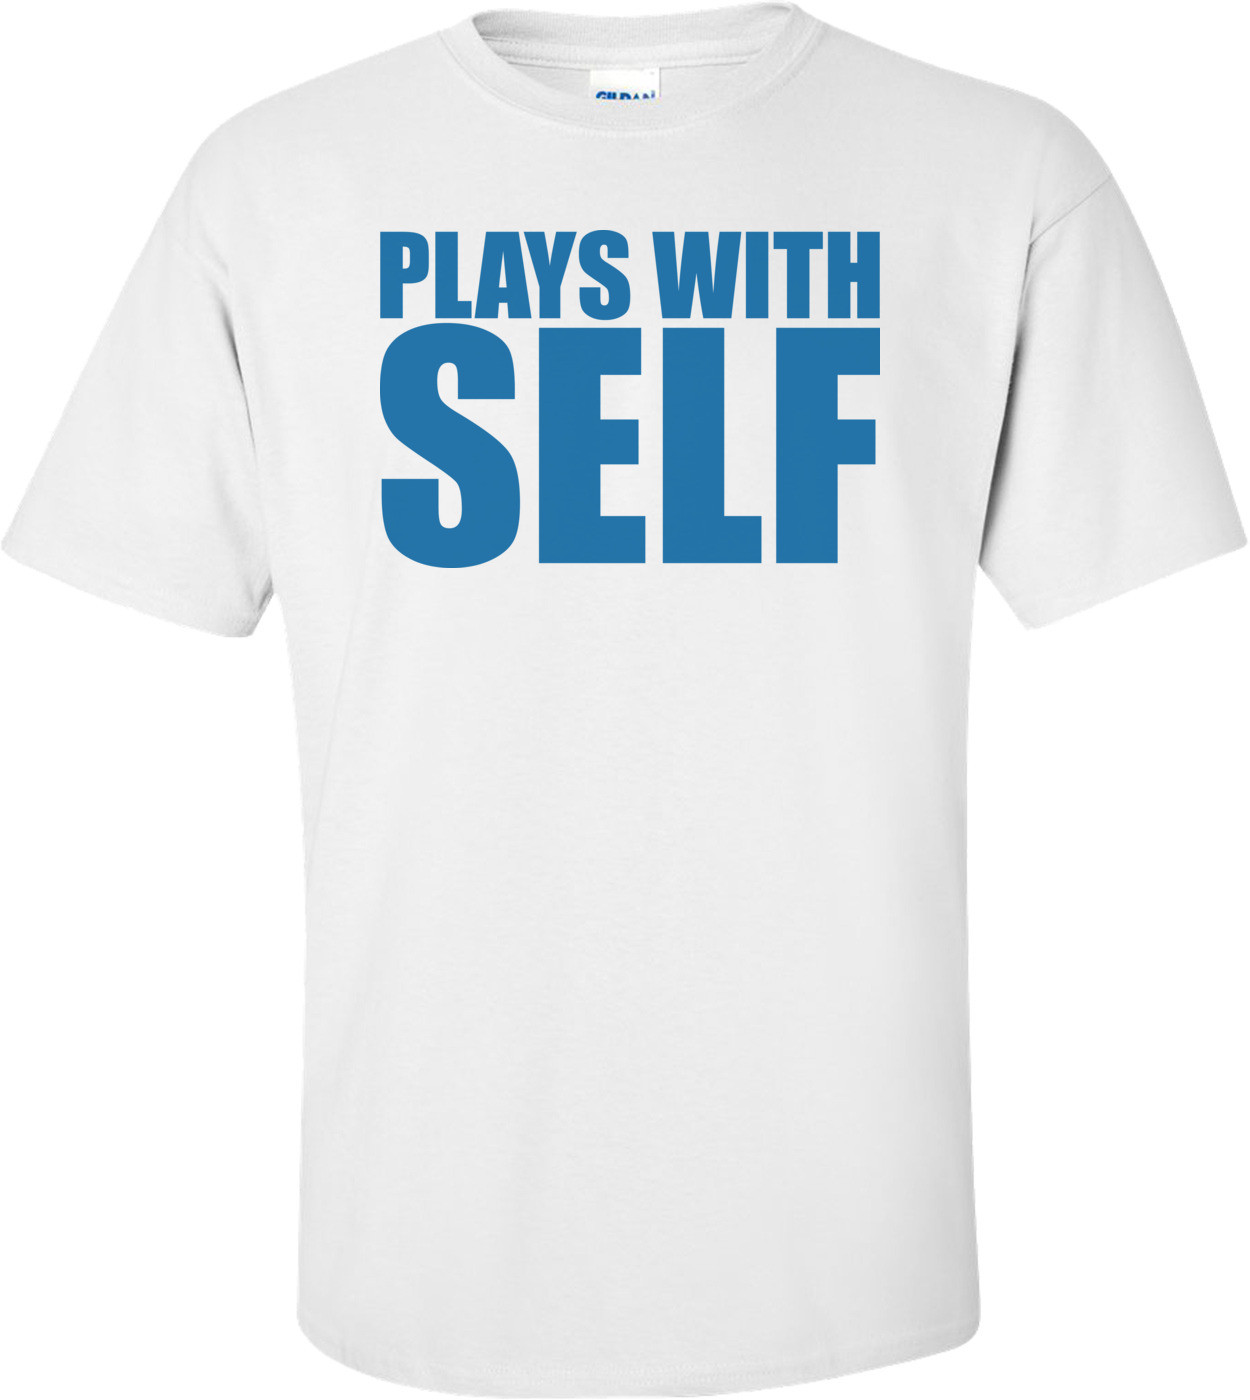 Plays With Self T-Shirt